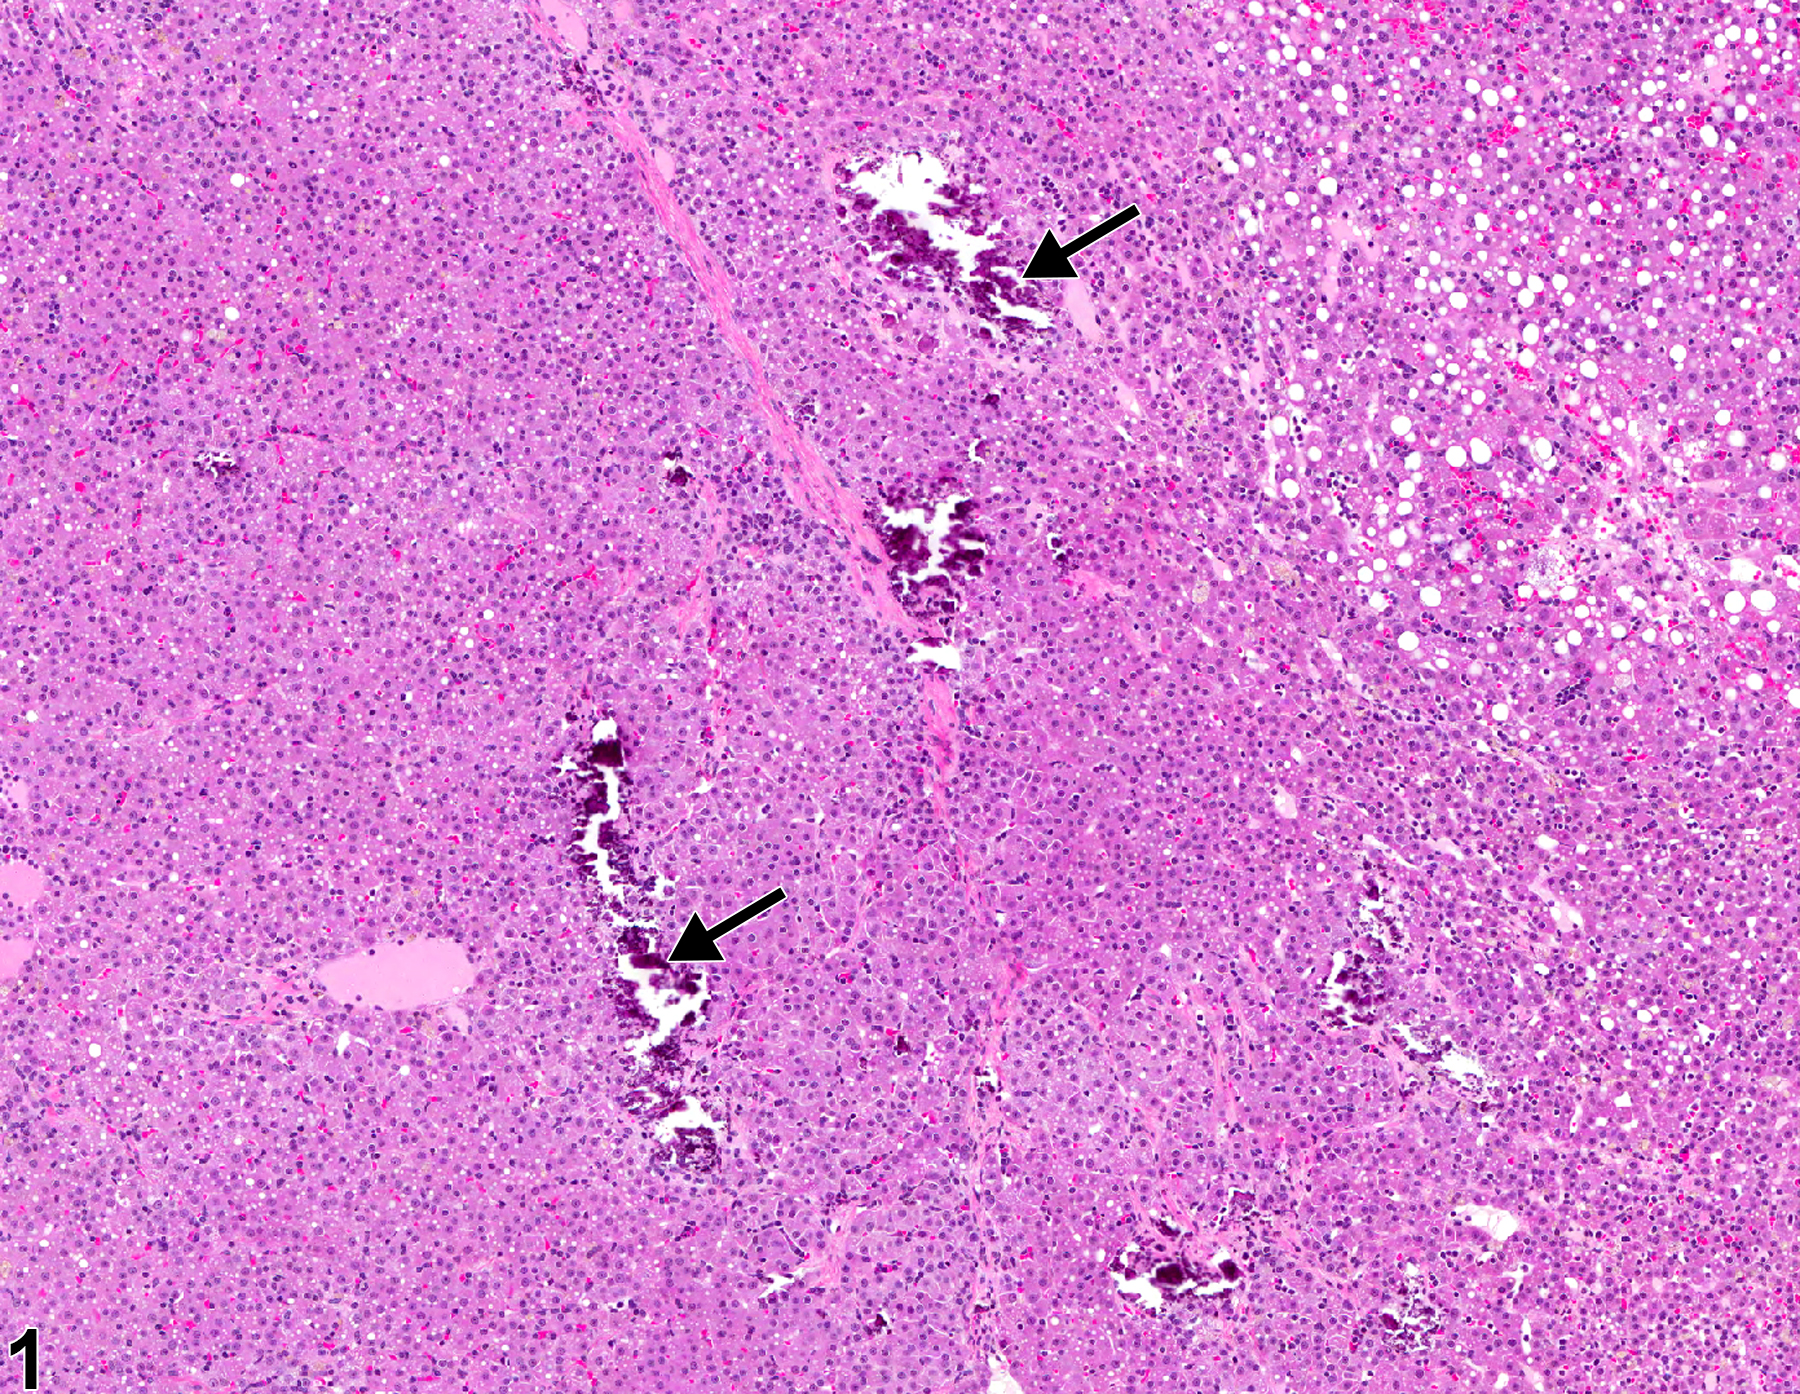 Image of mineralization in the adrenal gland from a male F344/N rat in a chronic study